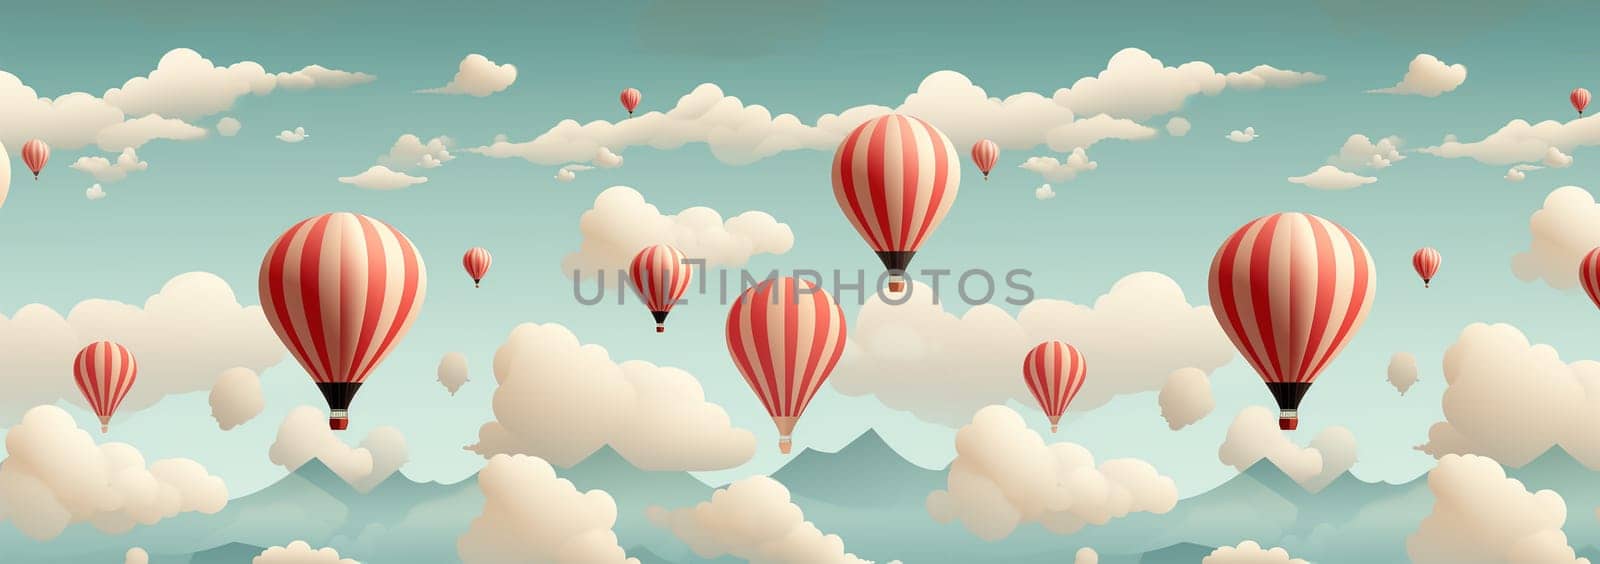 Cute pastel colored Boho seamless pattern with hot air balloons and clouds. Hand drawn balloon in the sky.Pastel neutral shades. Cute baby background. Funny decor for nursery, textiles, clothing, packaging, interior. by Annebel146